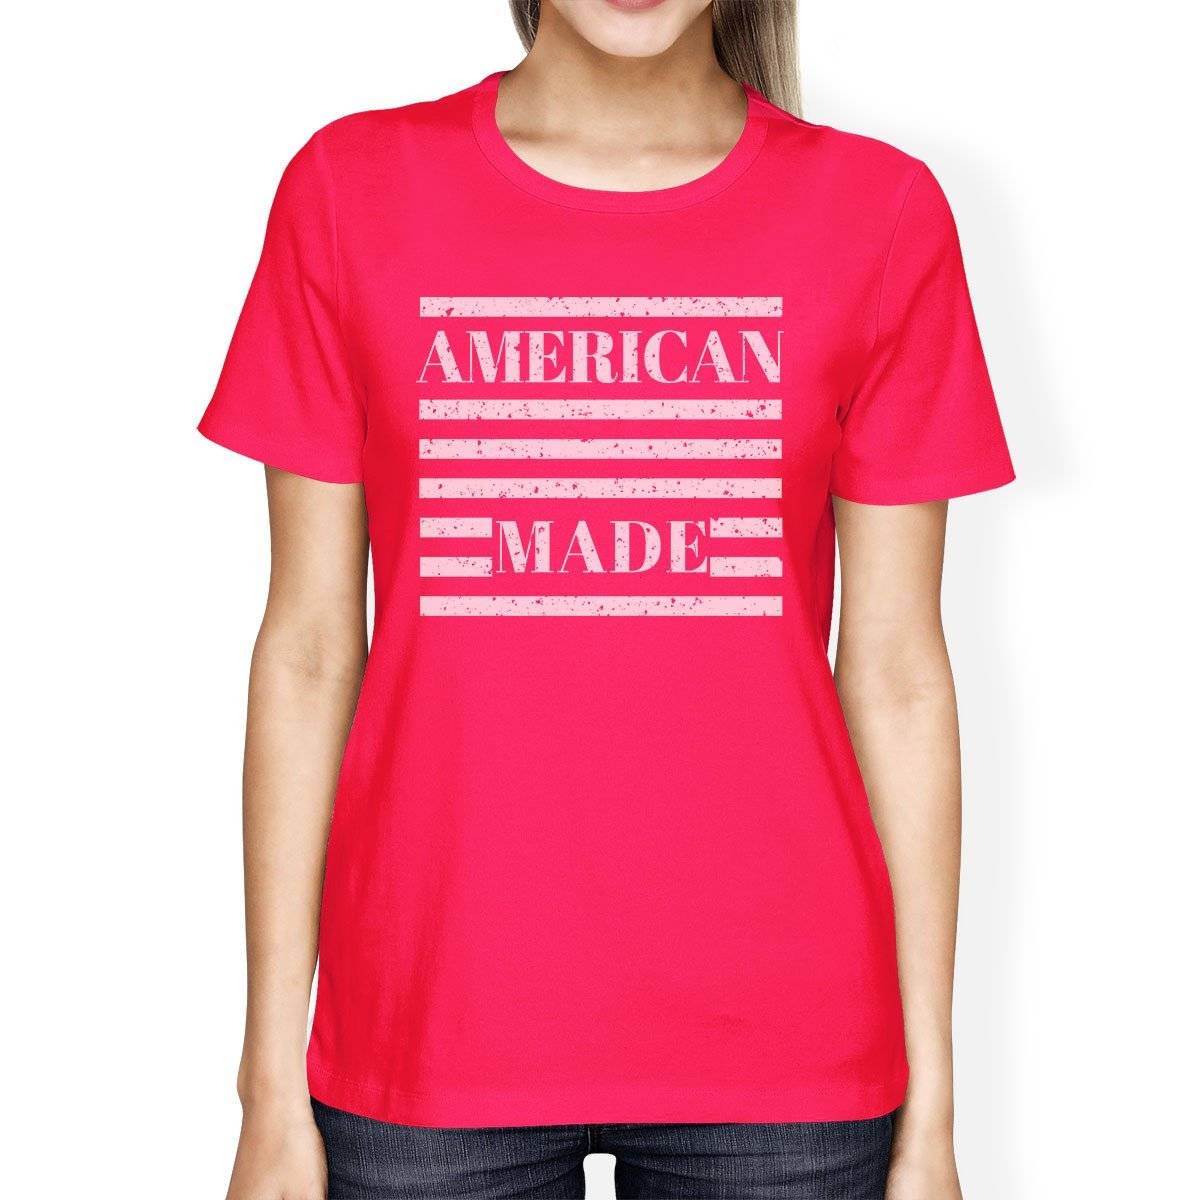 American Made Womens Hot Pink Graphic T-Shirt Unique Design Top